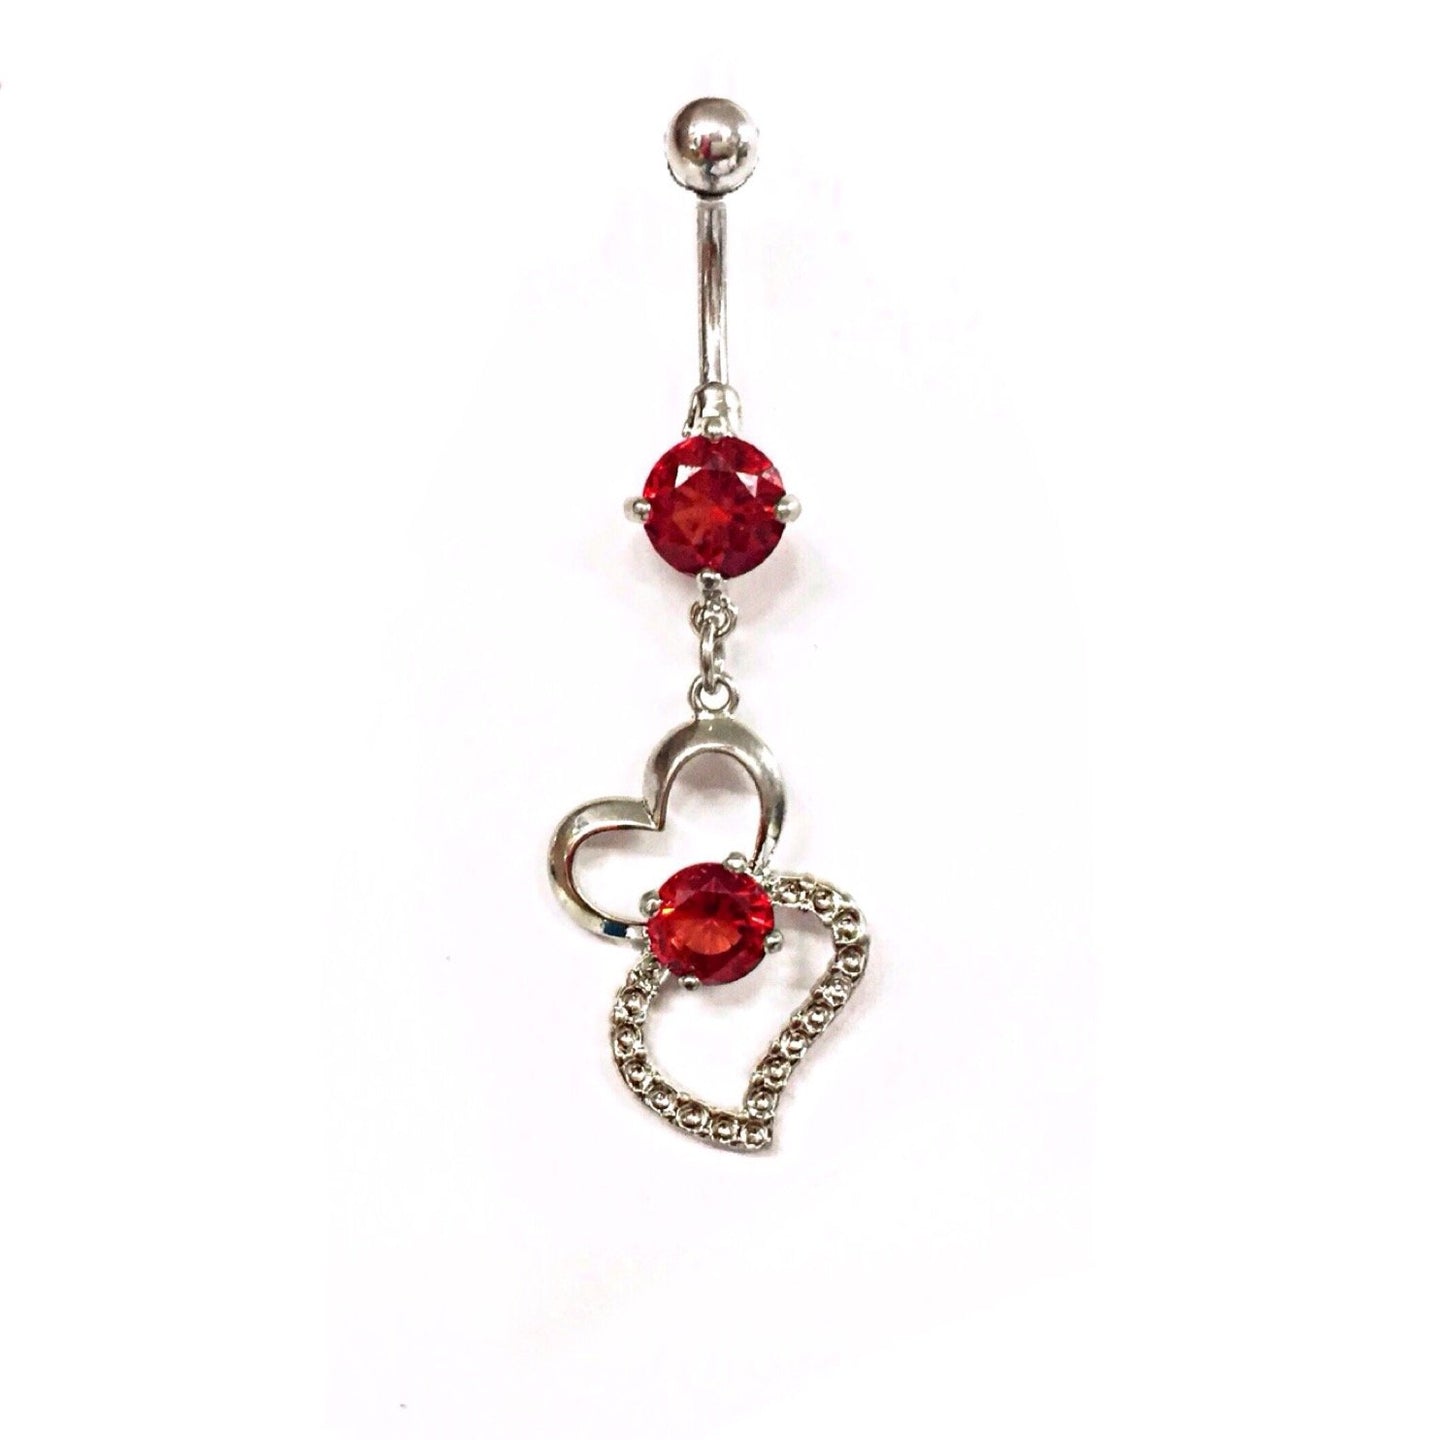 Stainless Steel Belly Rings - Attached At The Heart